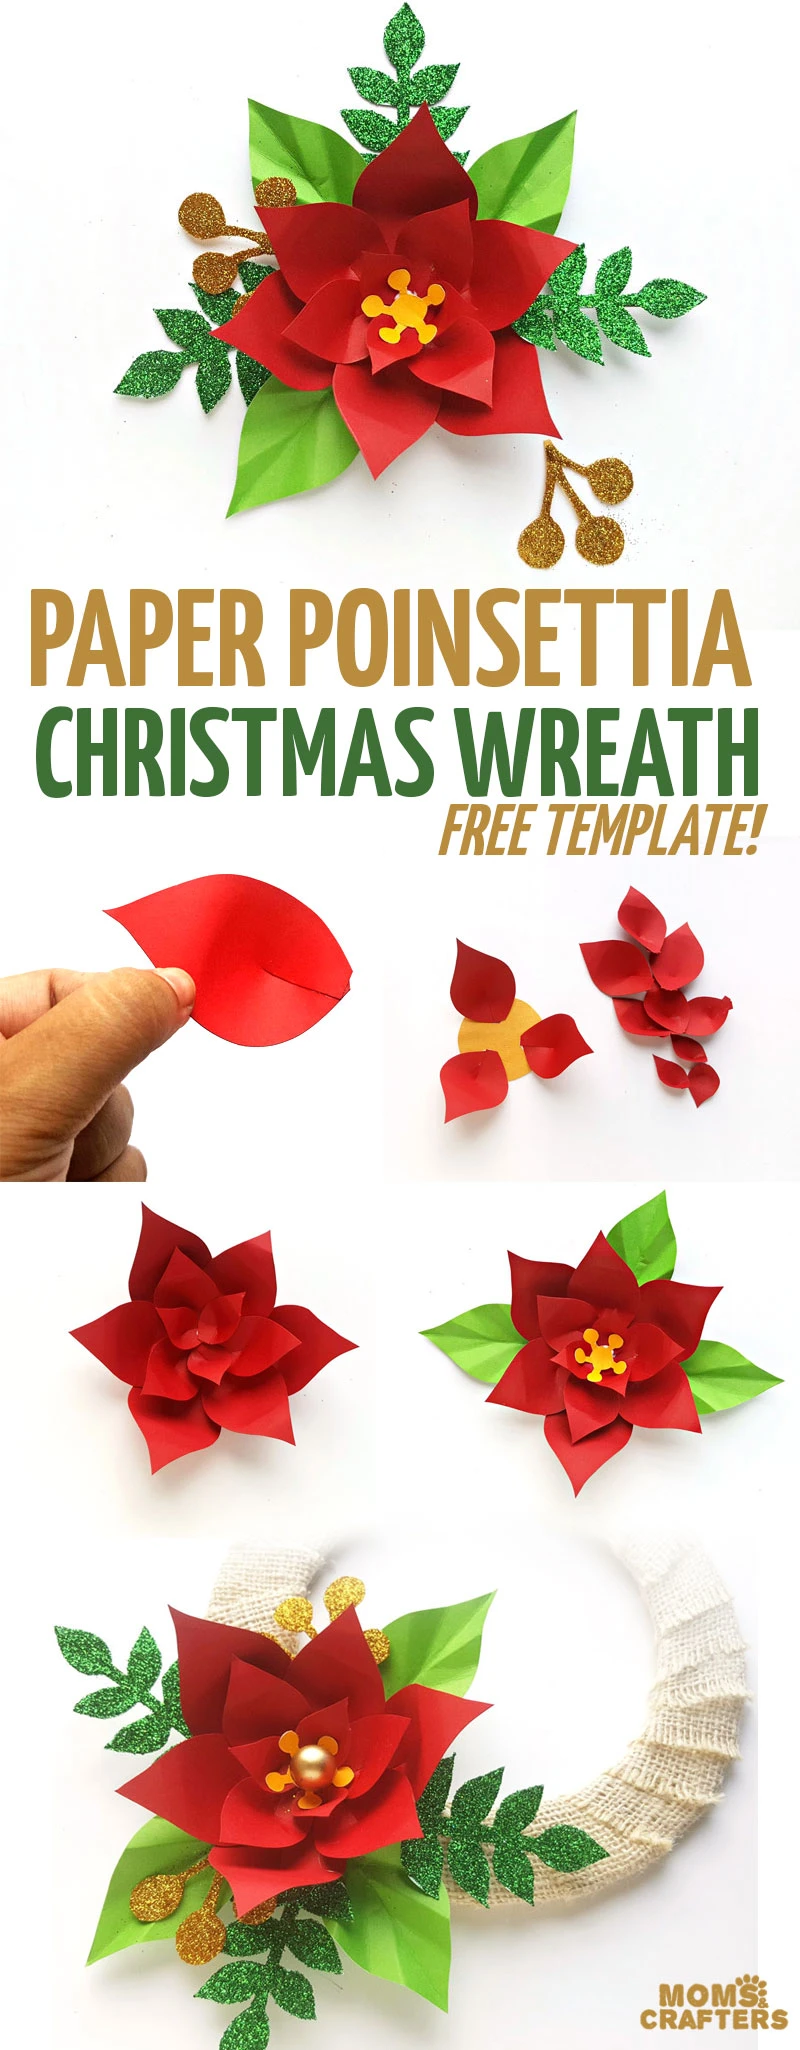 Click to learn how to make a paper flower christmas wreath using this free printable paper poinsettia template! This fun paper flower template makes a fun DIY Christmas craft for teens, tweens, and adults, and a fun paper flower home decor idea #poinsettia #christmaswreath #paperflowers